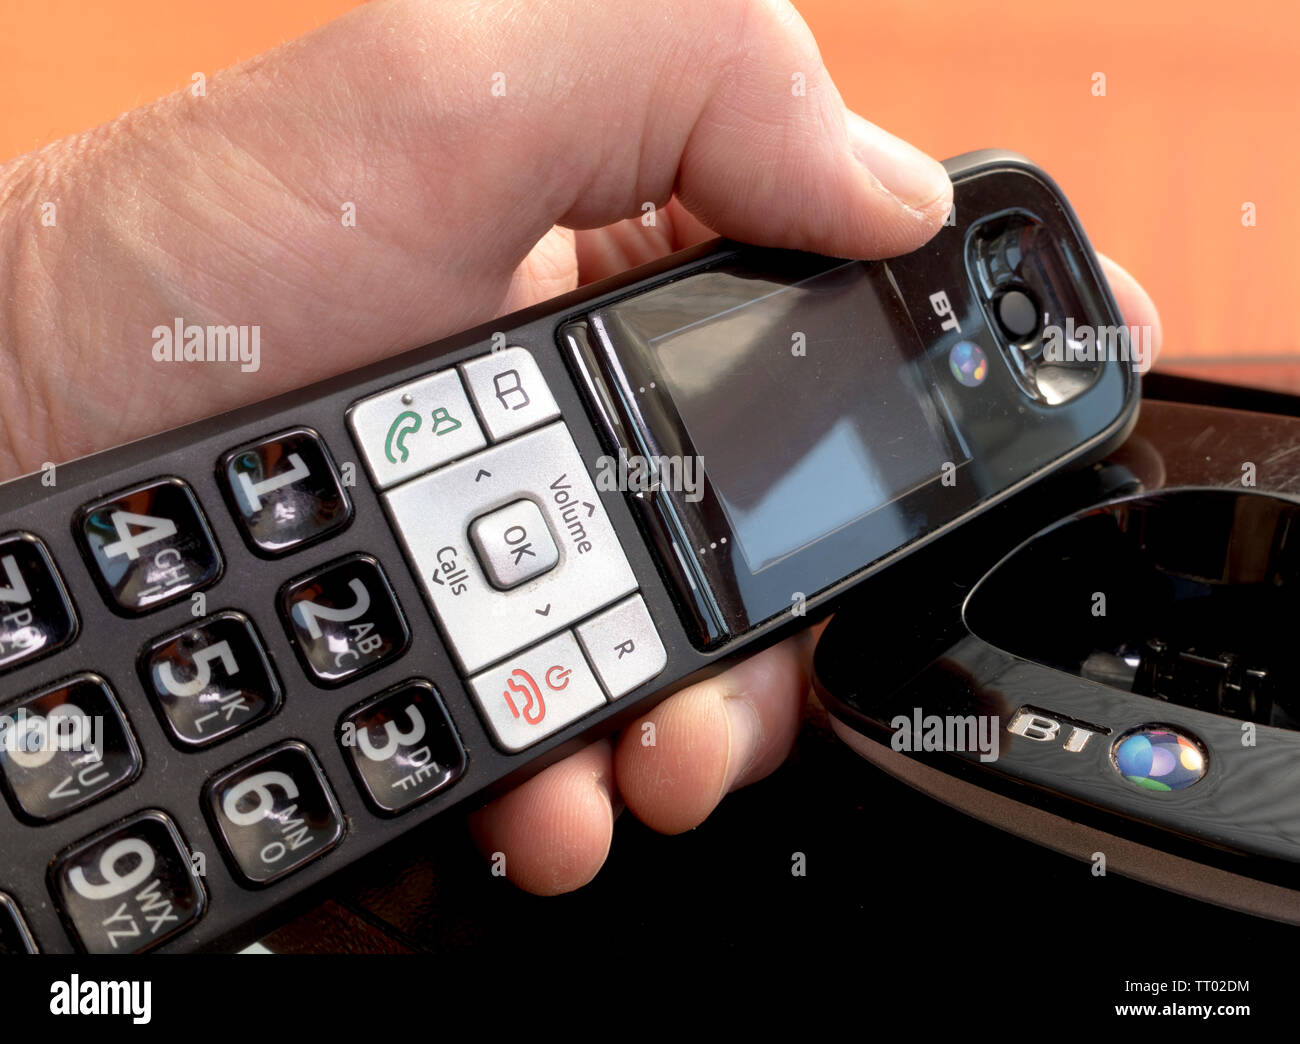 Man’s hand holding a BT hands free landline telephone next to its cradle, about to make a phone call. Stock Photo